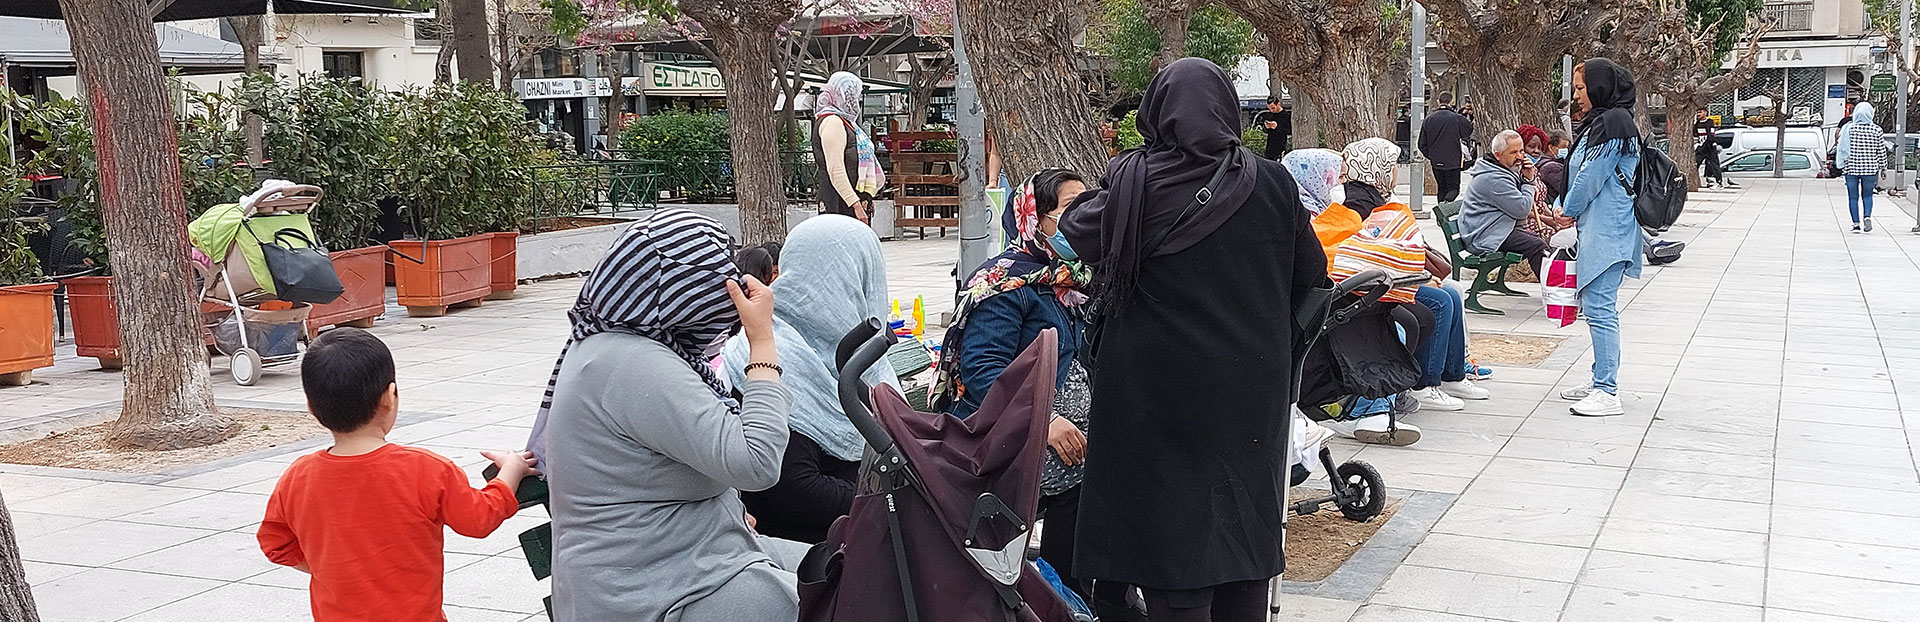 JRS-Greece – Drawing close to refugees in Athens